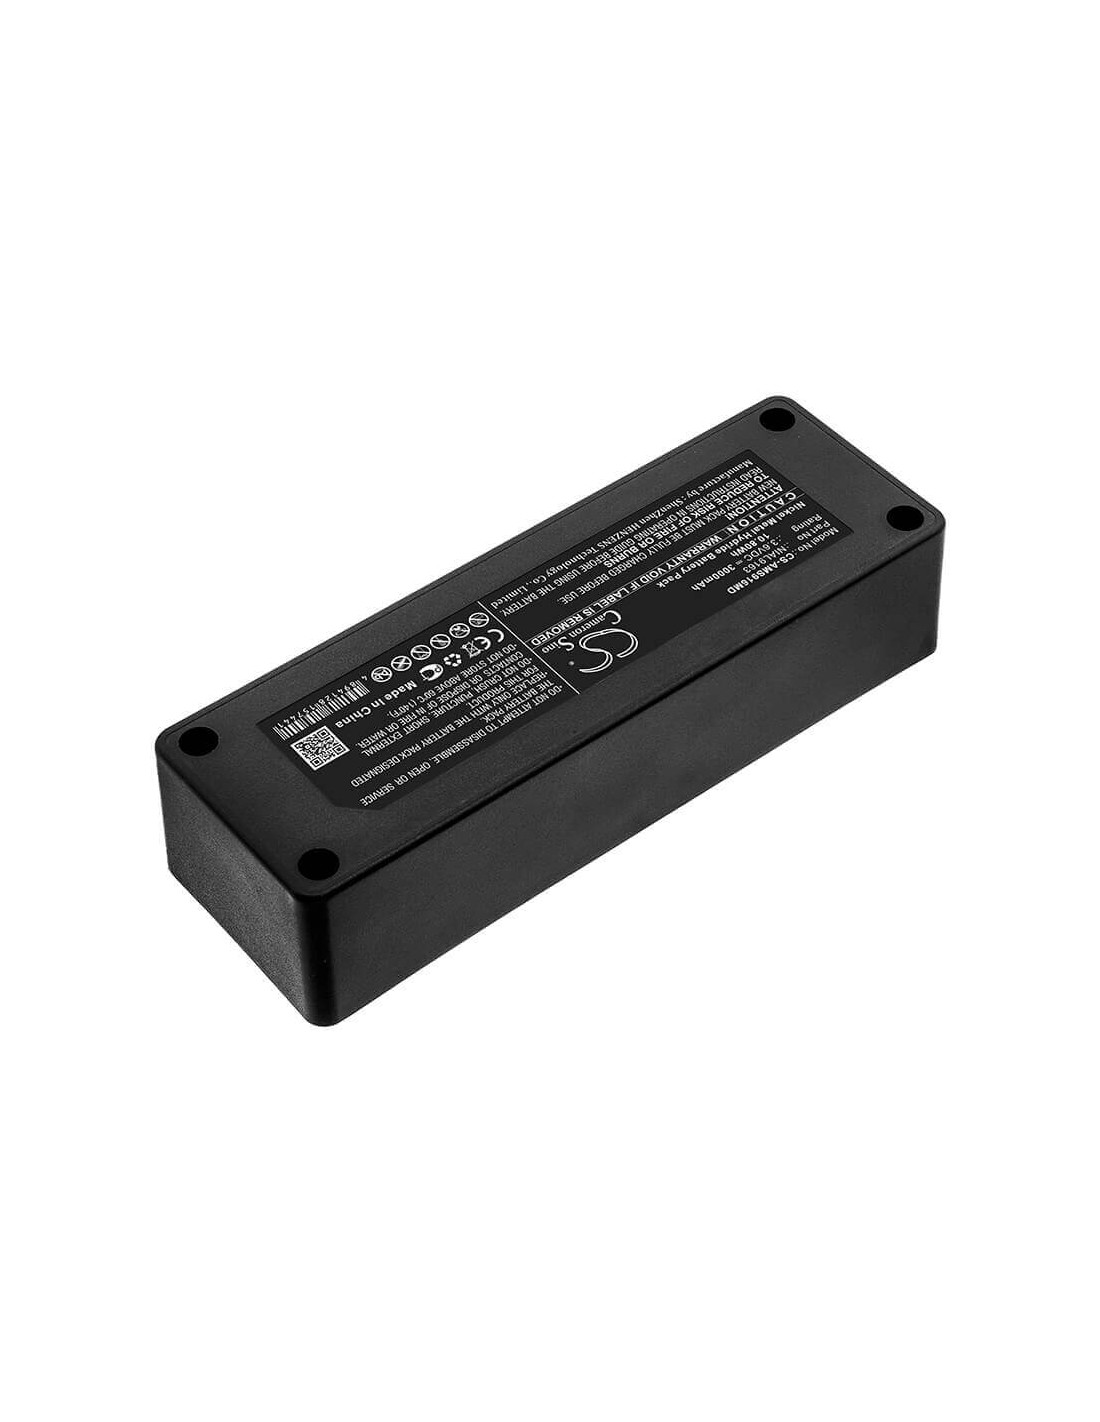 Battery for Alaris Medicalsystems, Iii Infusion Pump, Infusion Pump Iii 3.6V, 3000mAh - 10.80Wh